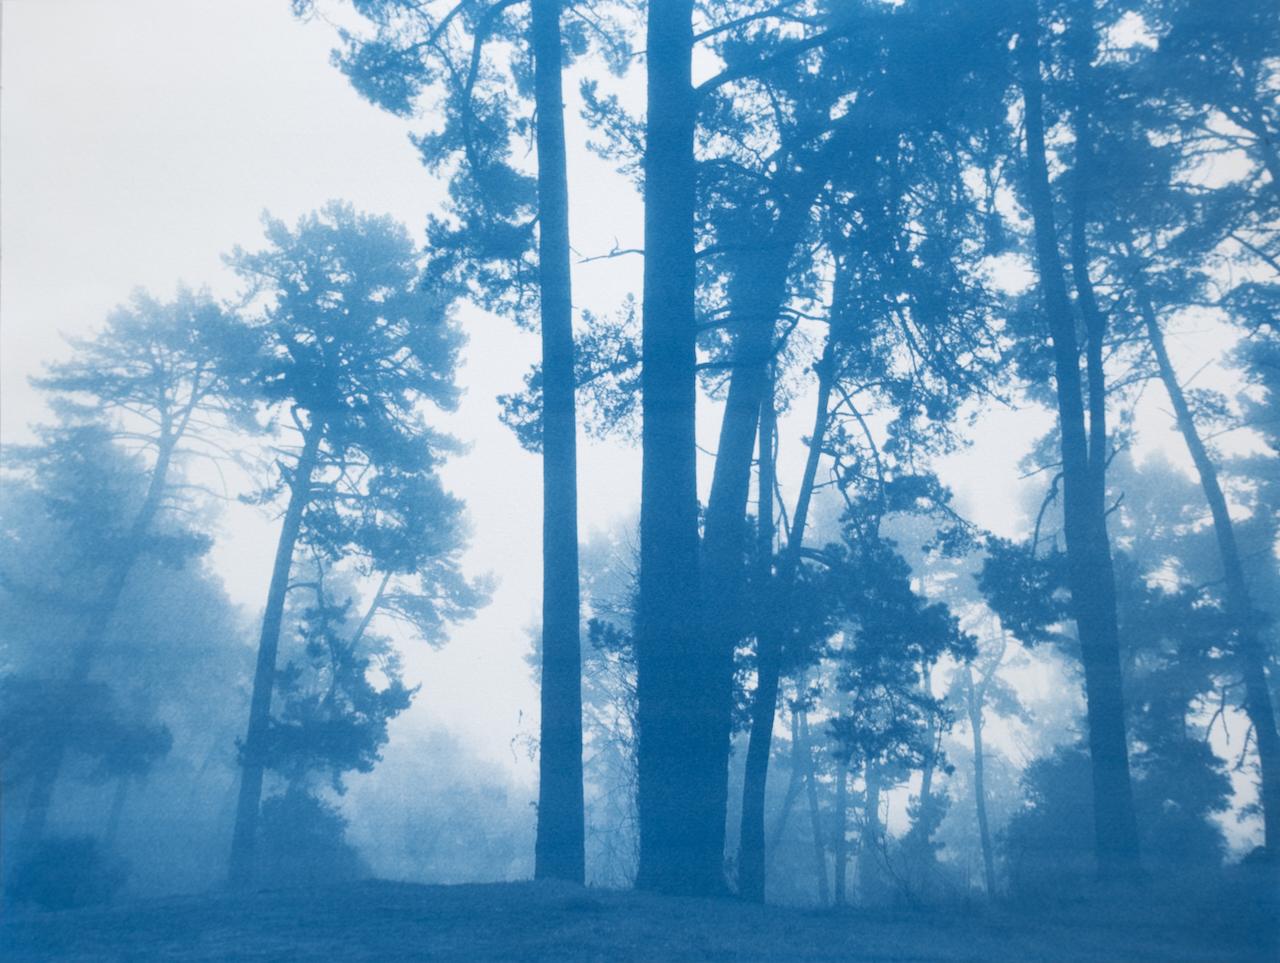 Morning Valley Light (Hand-printed cyanotype, 18 x 24 inches)